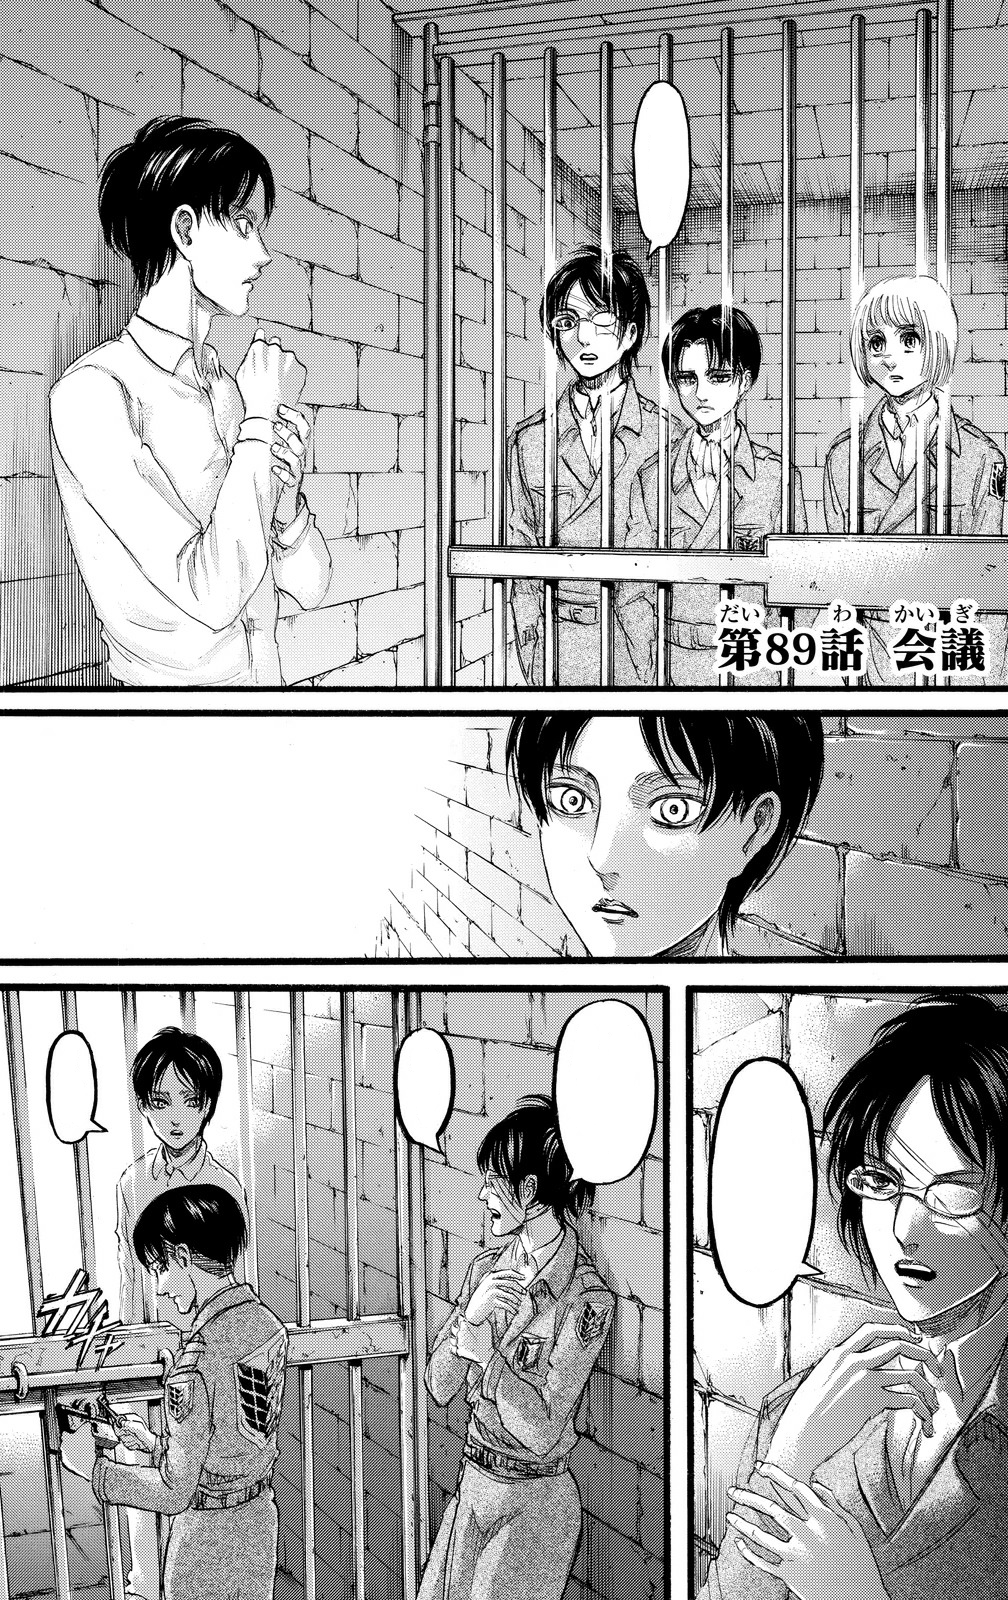 How many Attack on Titan manga chapters have been adapted by ep 87?